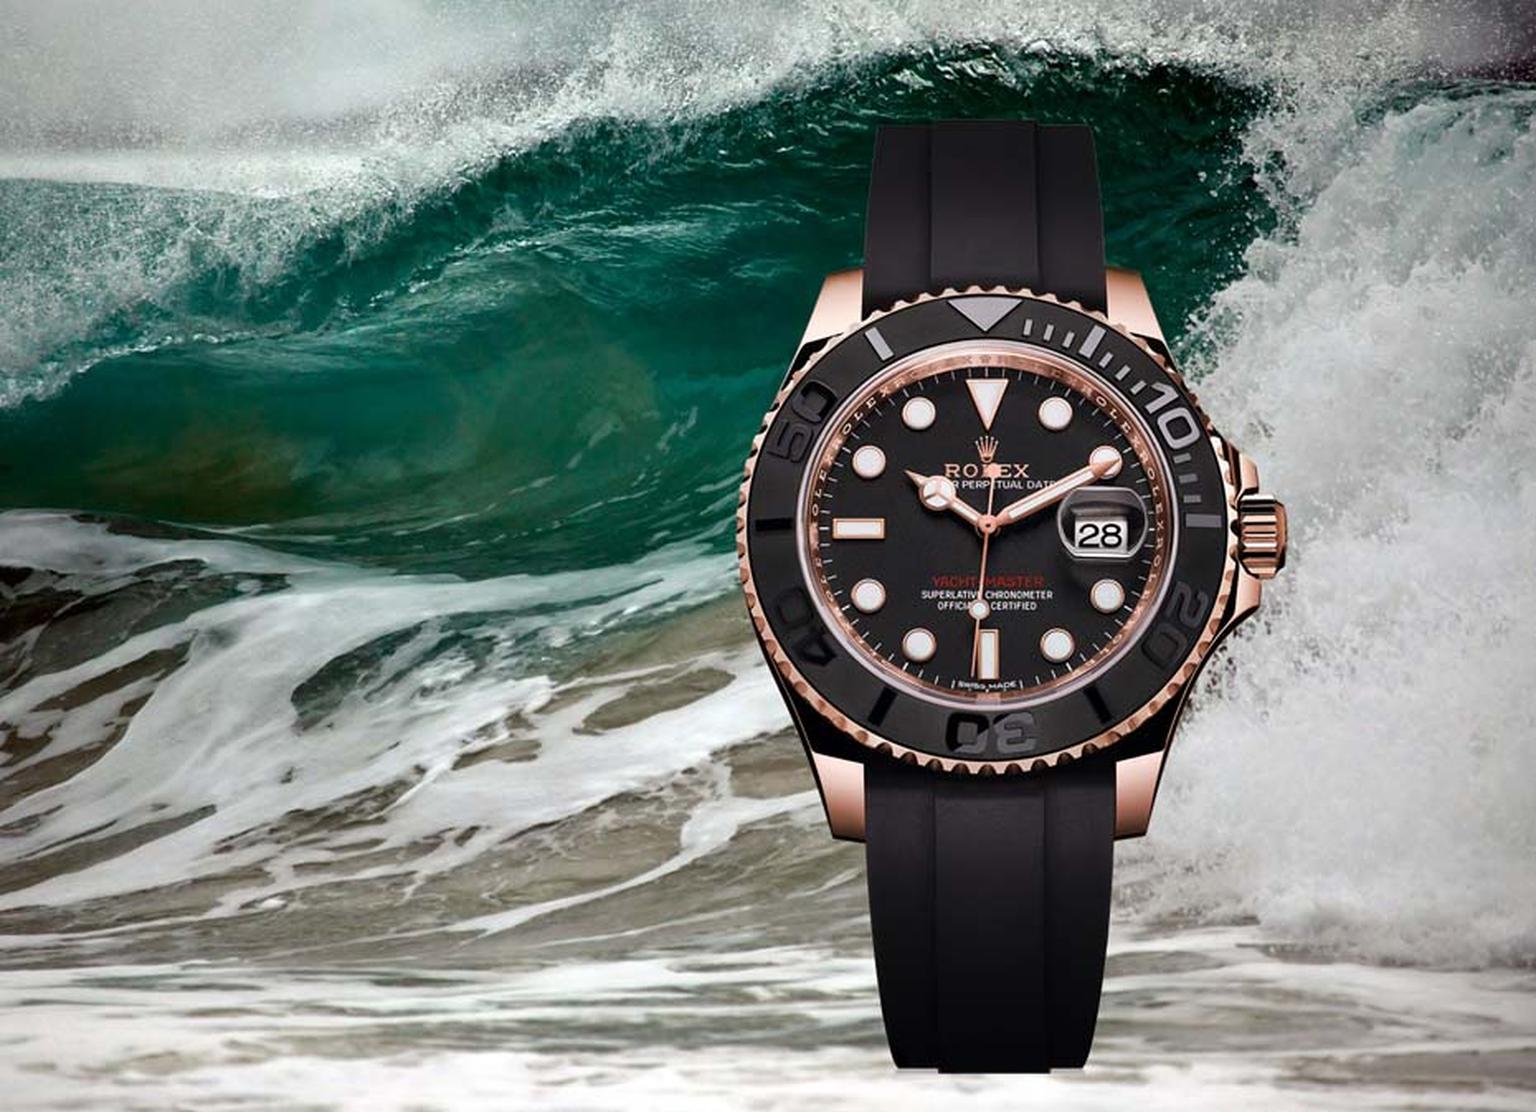 yacht master water resistance